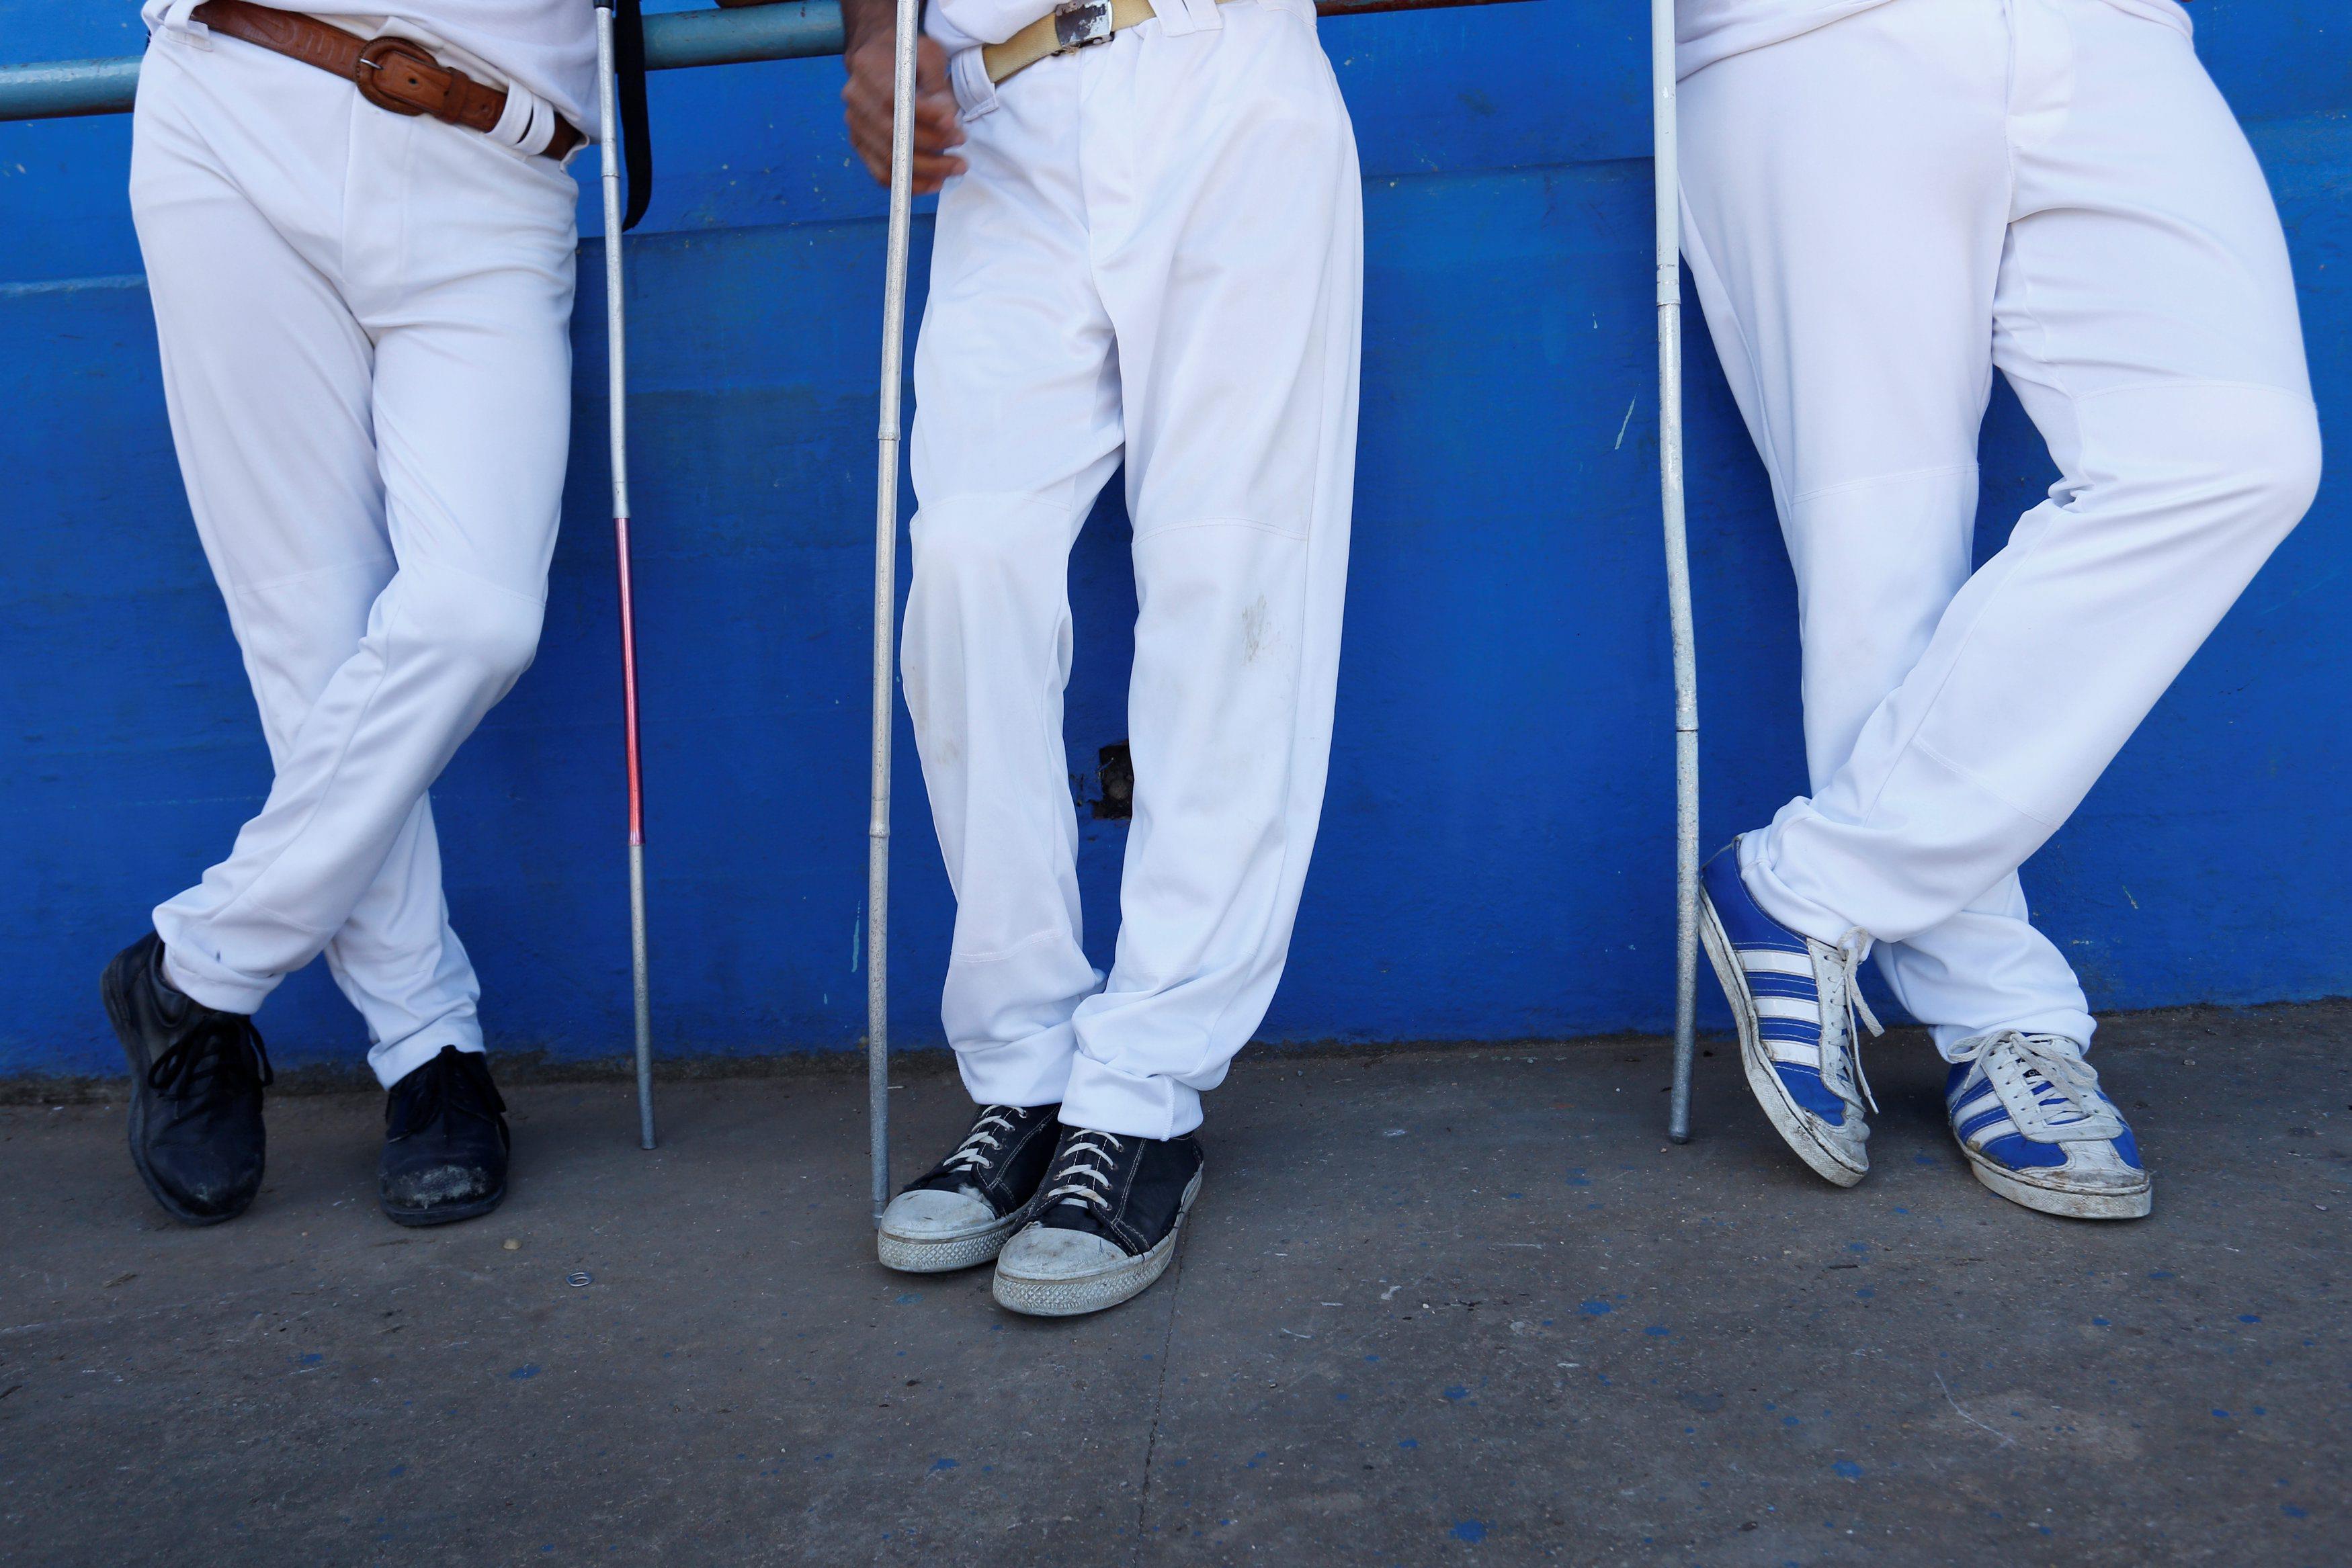 The visually impaired wait for a baseball lesson to begin at the Changa Medero stadium, in Havana